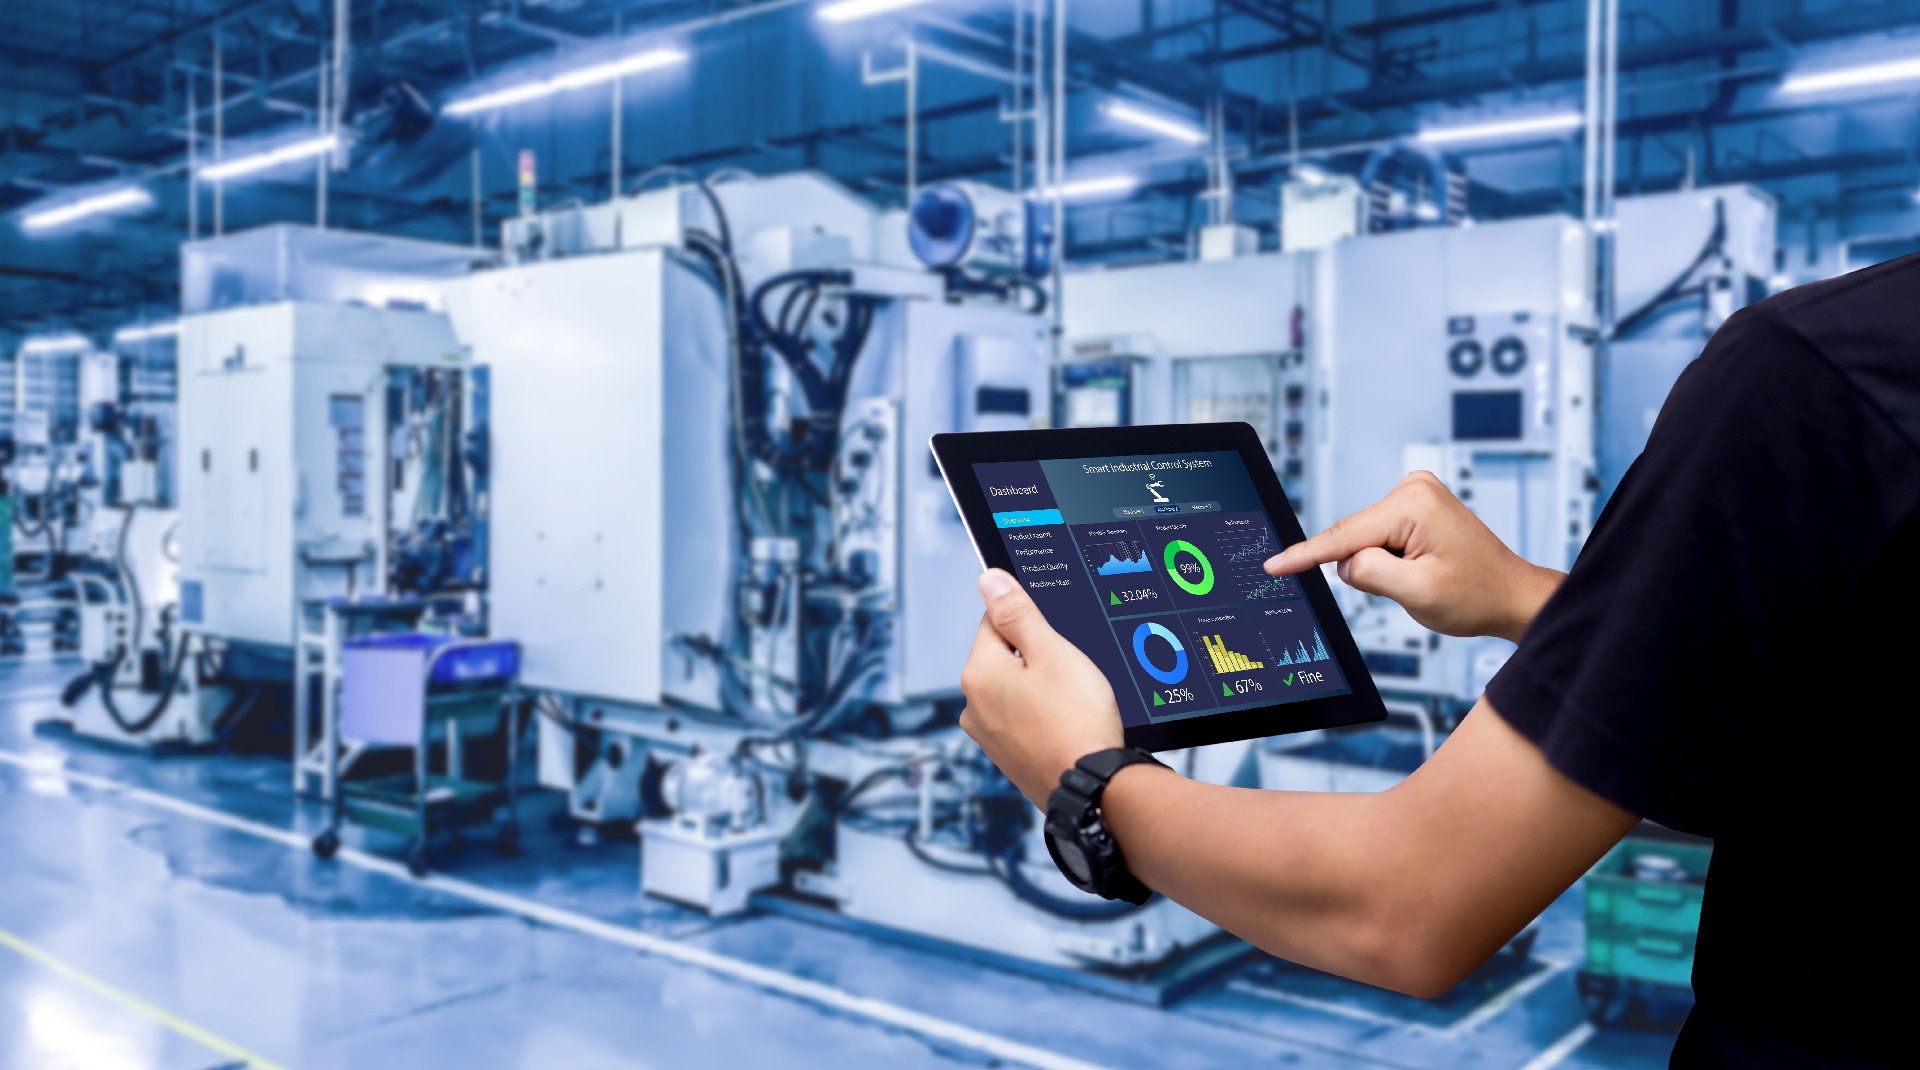 Cyient and Thingtrax Announce a Partnership to Enable Manufacturers to Reduce Costs and Increase Efficiency